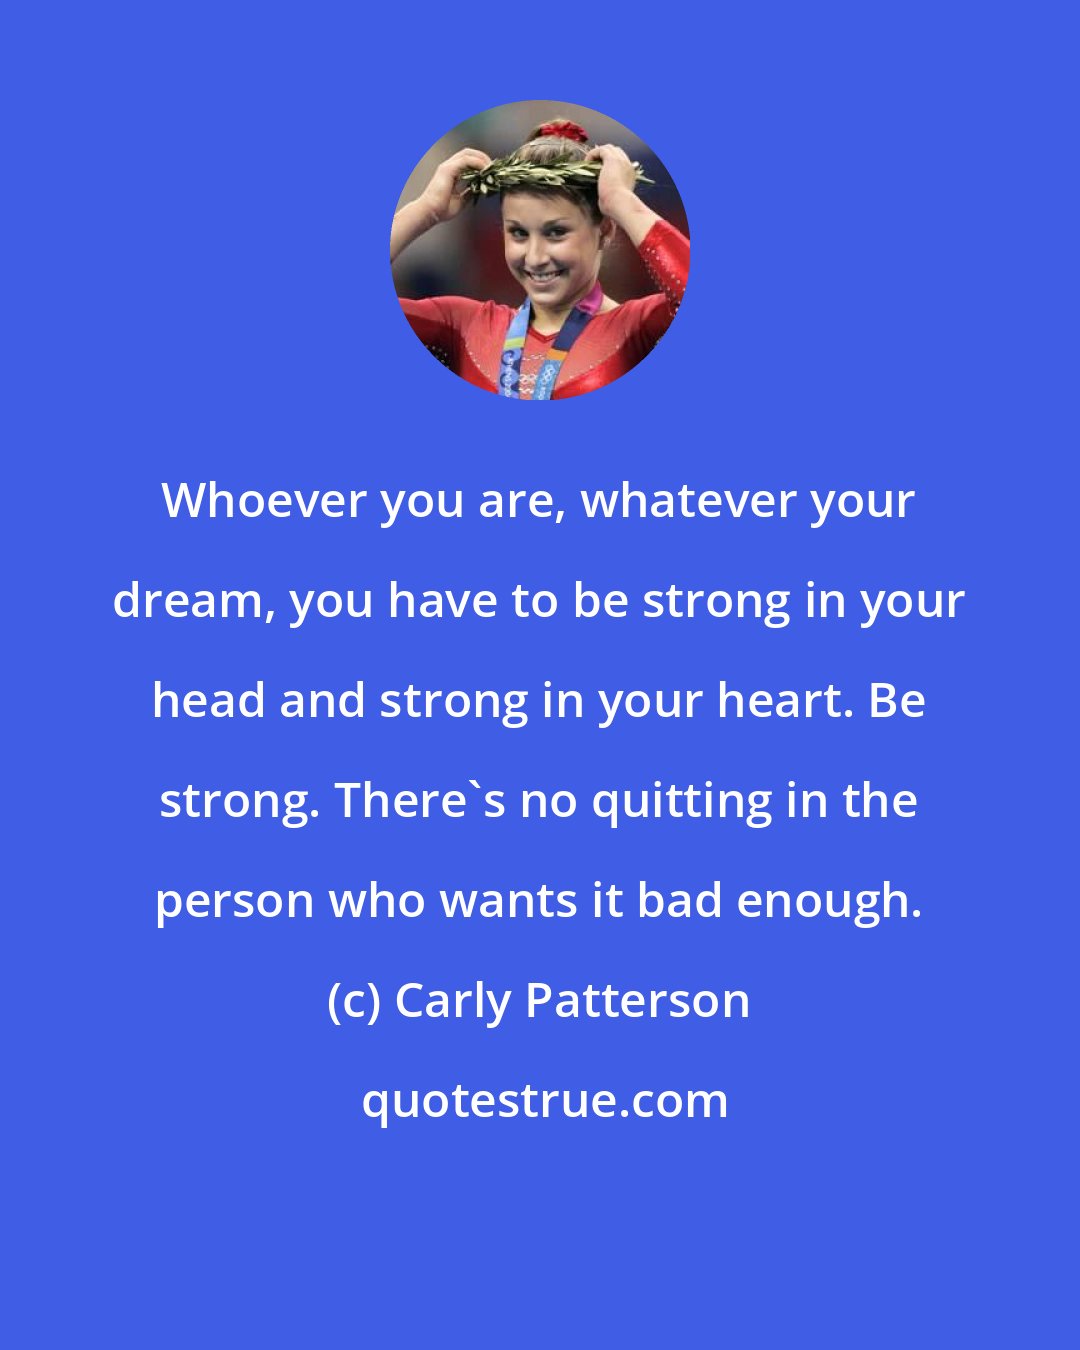 Carly Patterson: Whoever you are, whatever your dream, you have to be strong in your head and strong in your heart. Be strong. There's no quitting in the person who wants it bad enough.